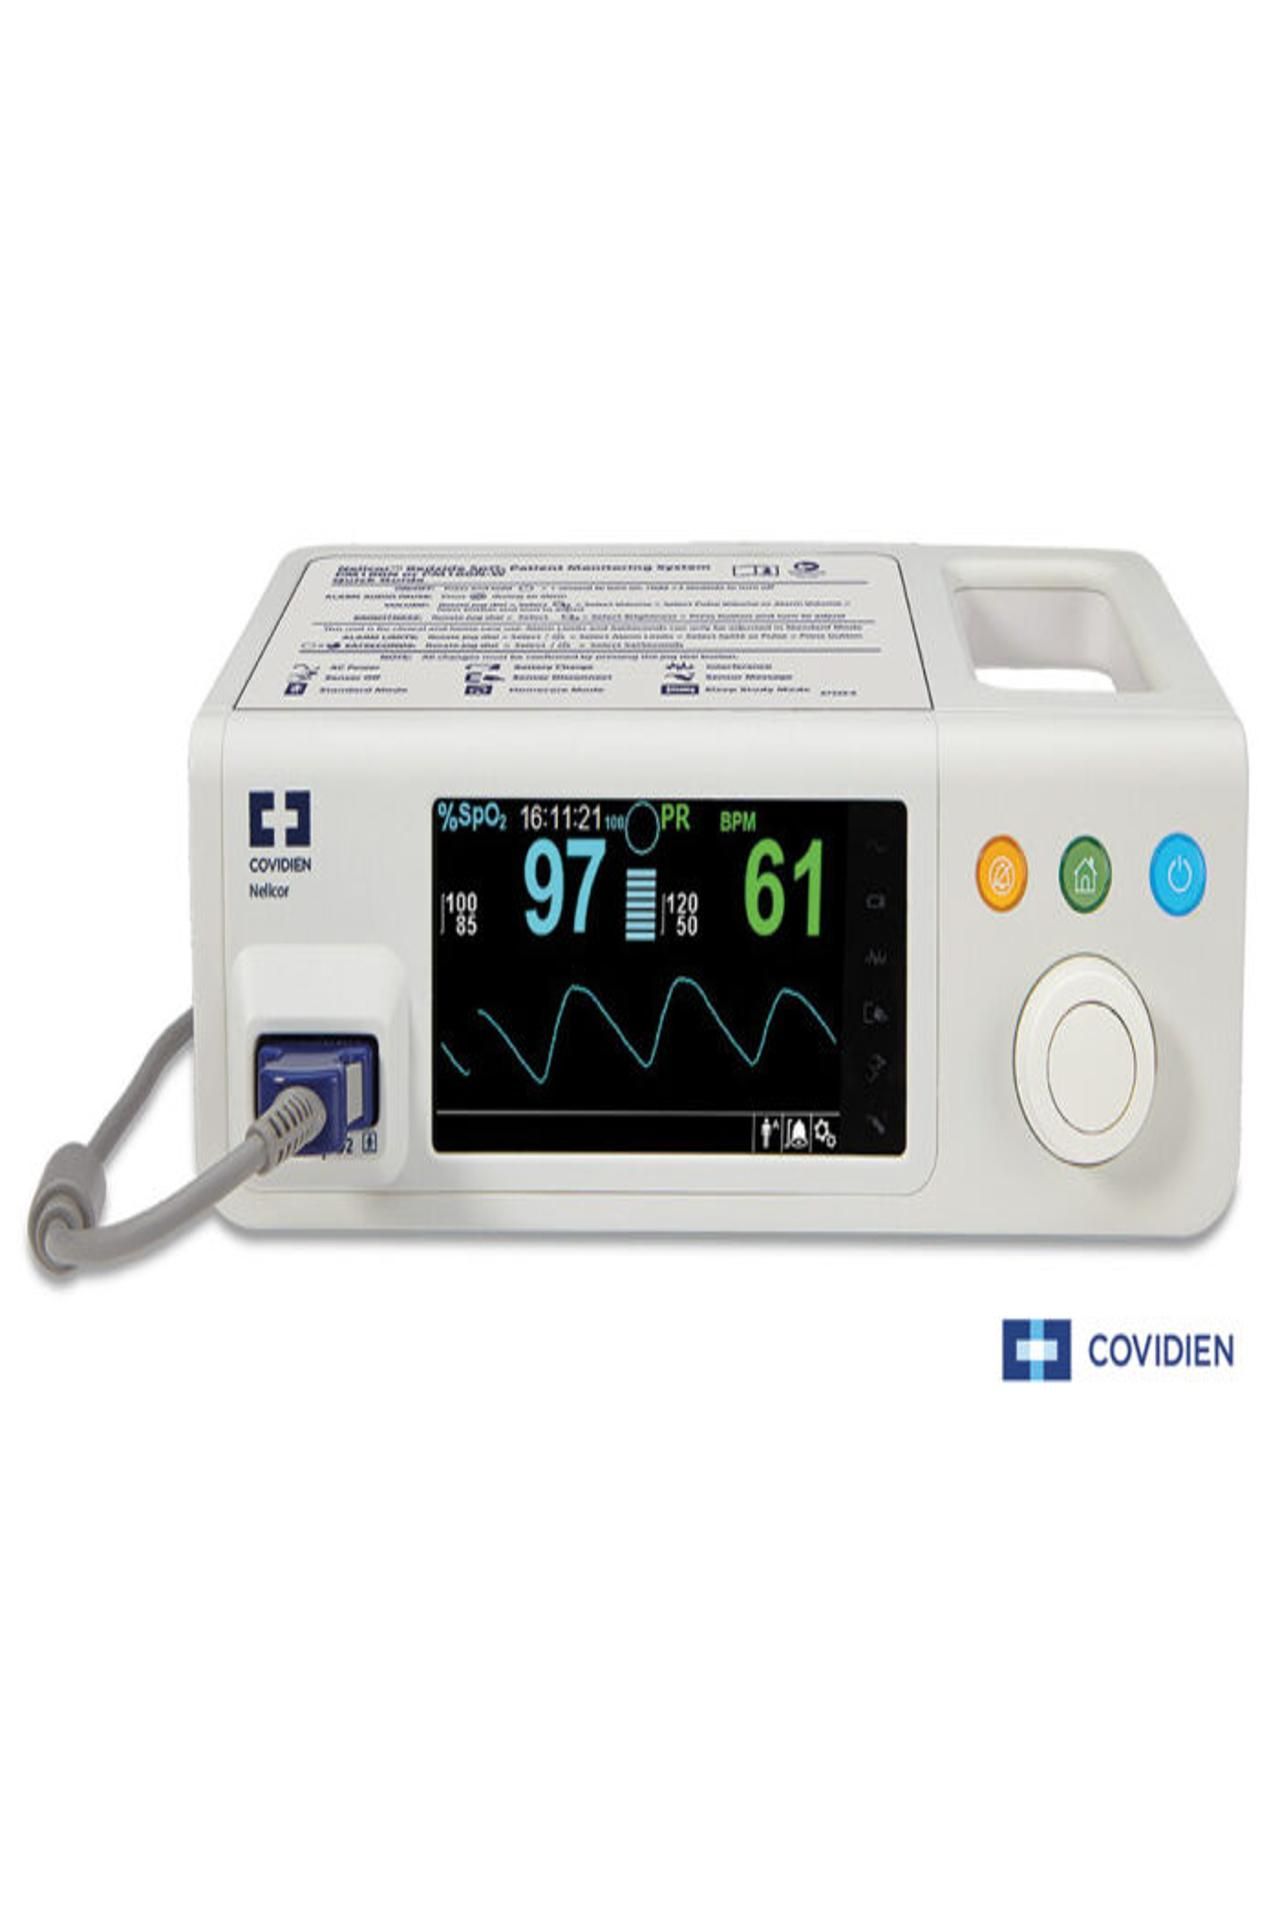 Nellcor PM100N Patient Monitoring System - As New (Stock image).